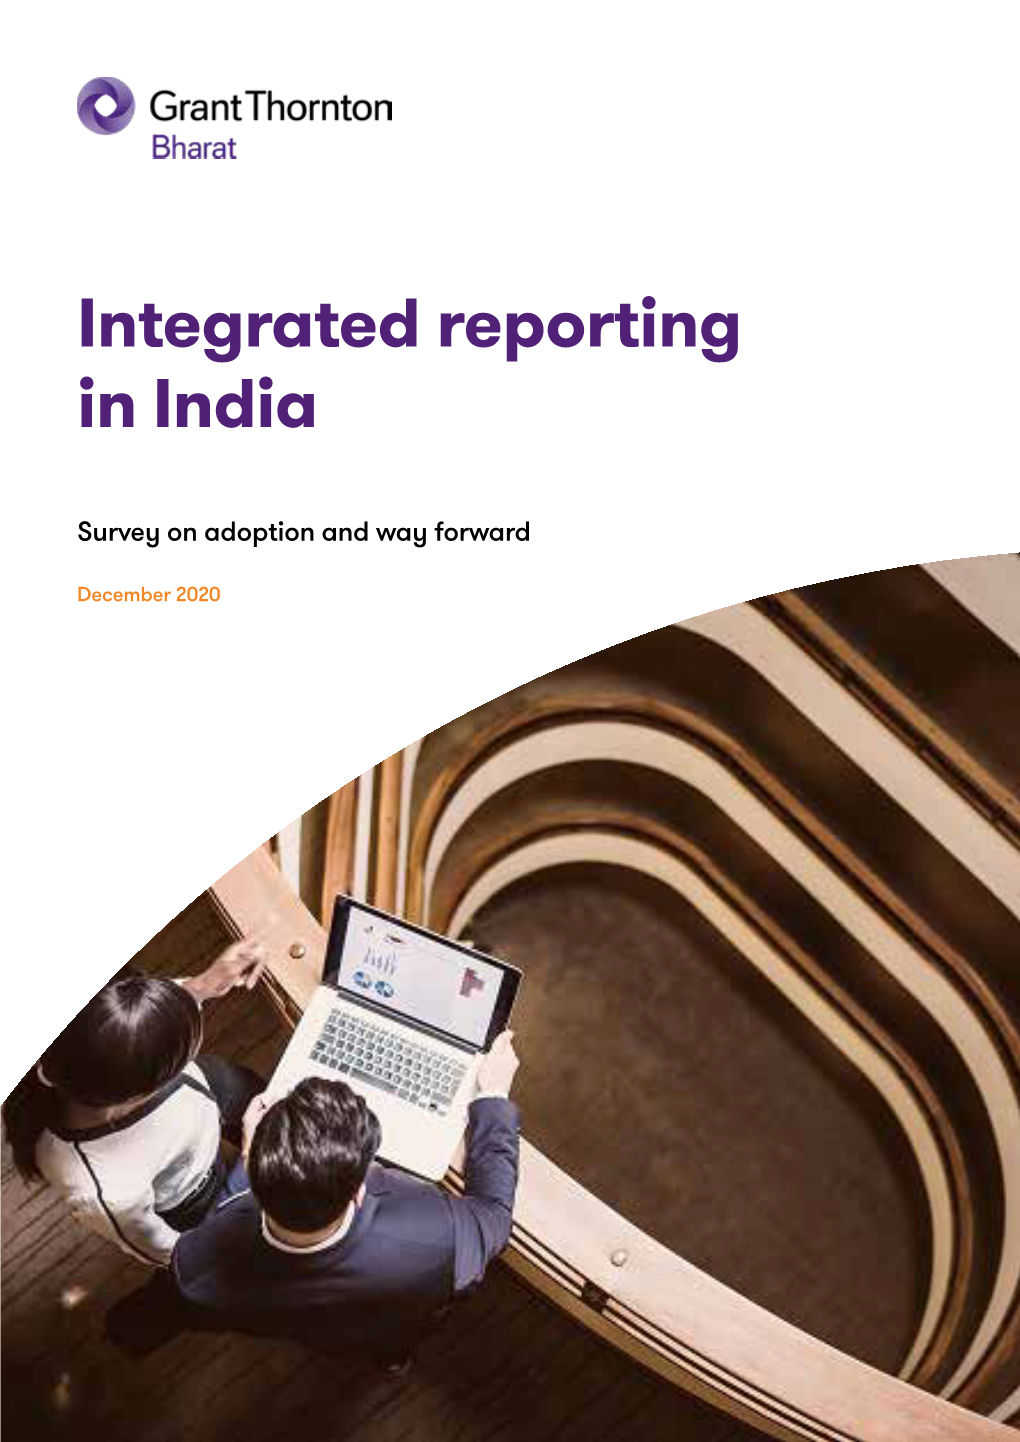 Grant Thornton Bharat's Report on Integrated Reporting in India